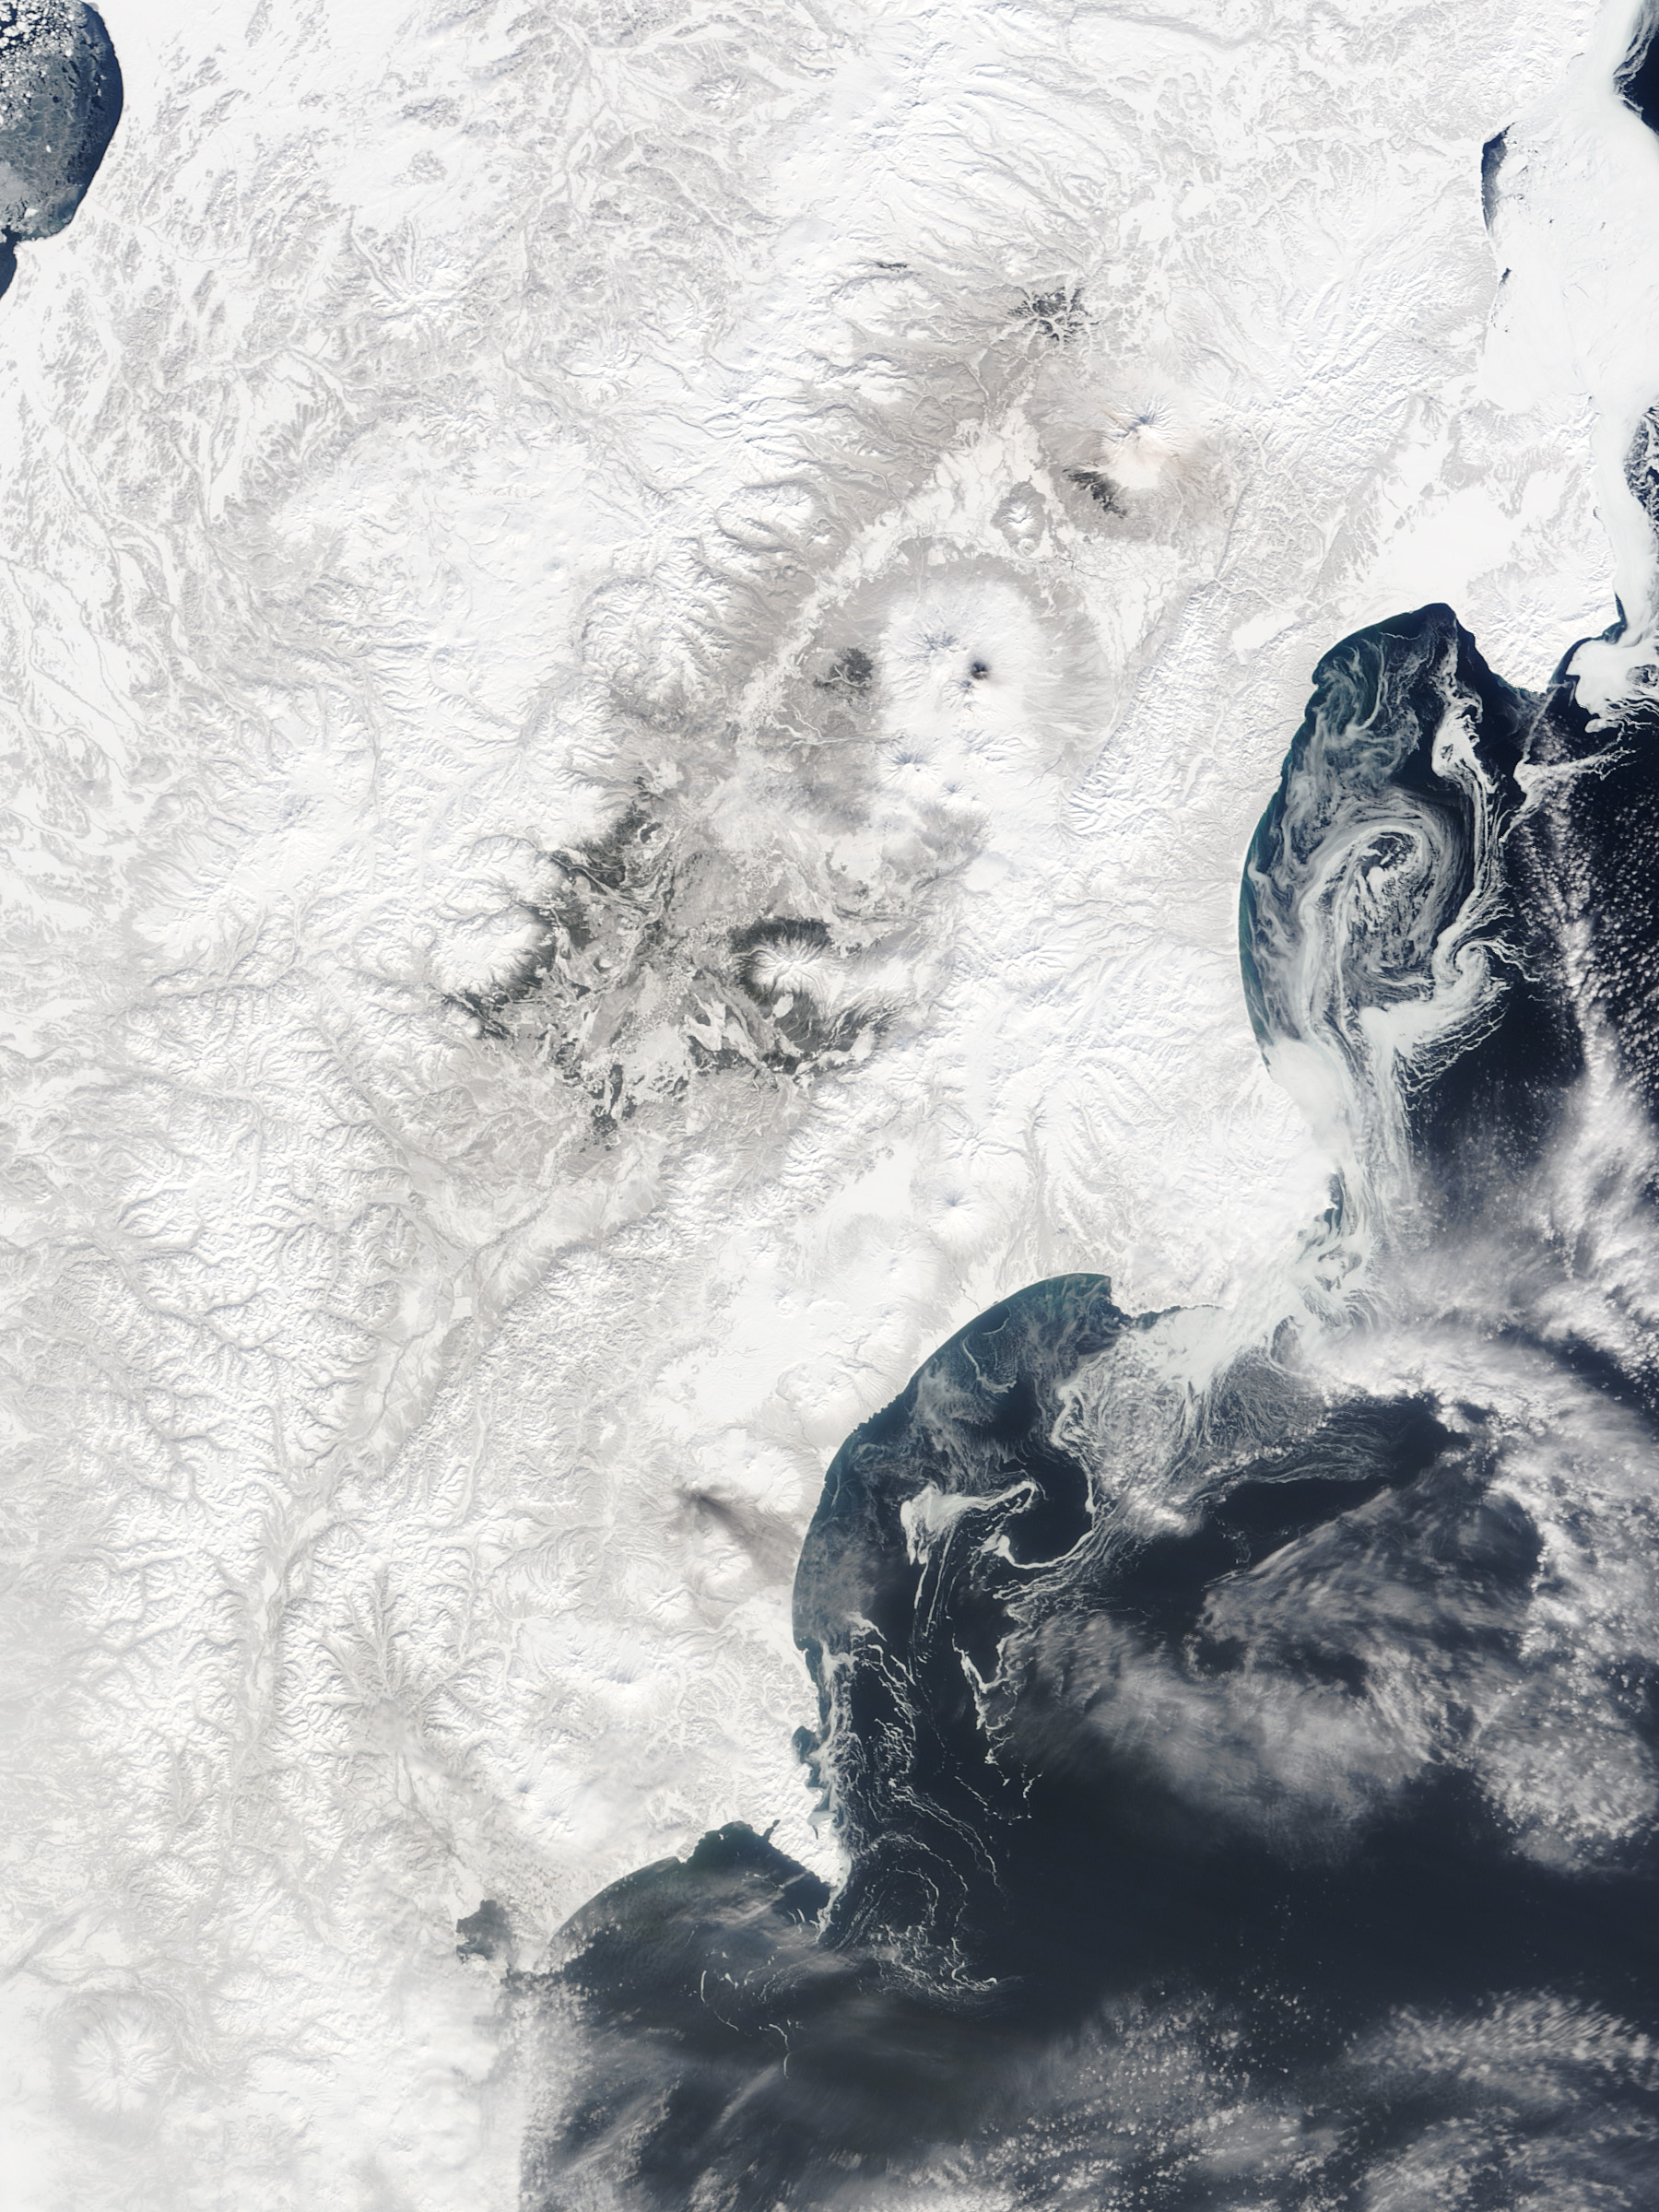 Four Erupting Kamchatka Volcanoes - related image preview